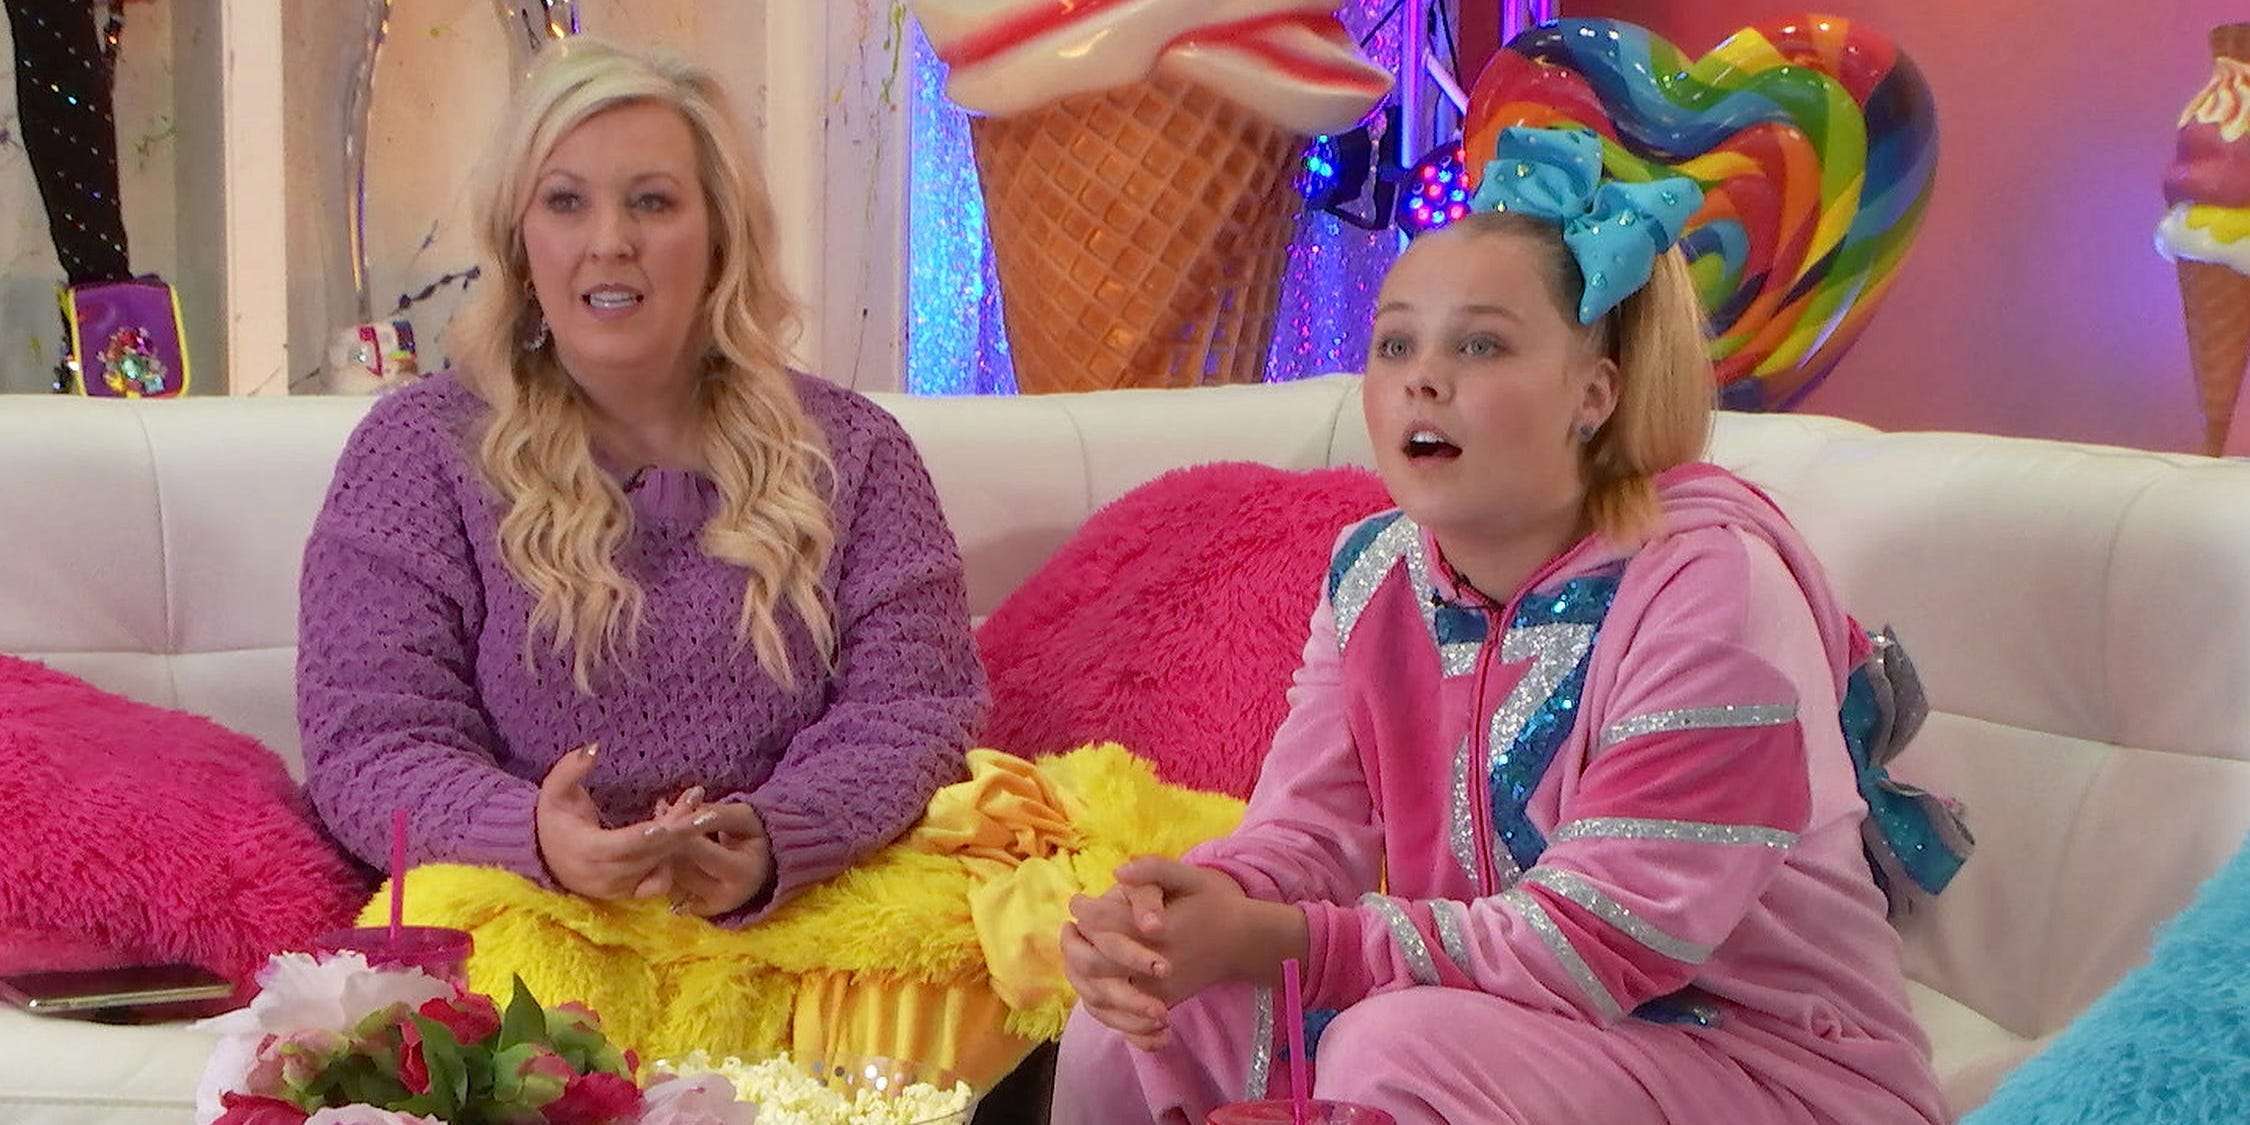 Jojo Siwa Confirms Shes A Part Of The Lgbtq Community And Says Shes